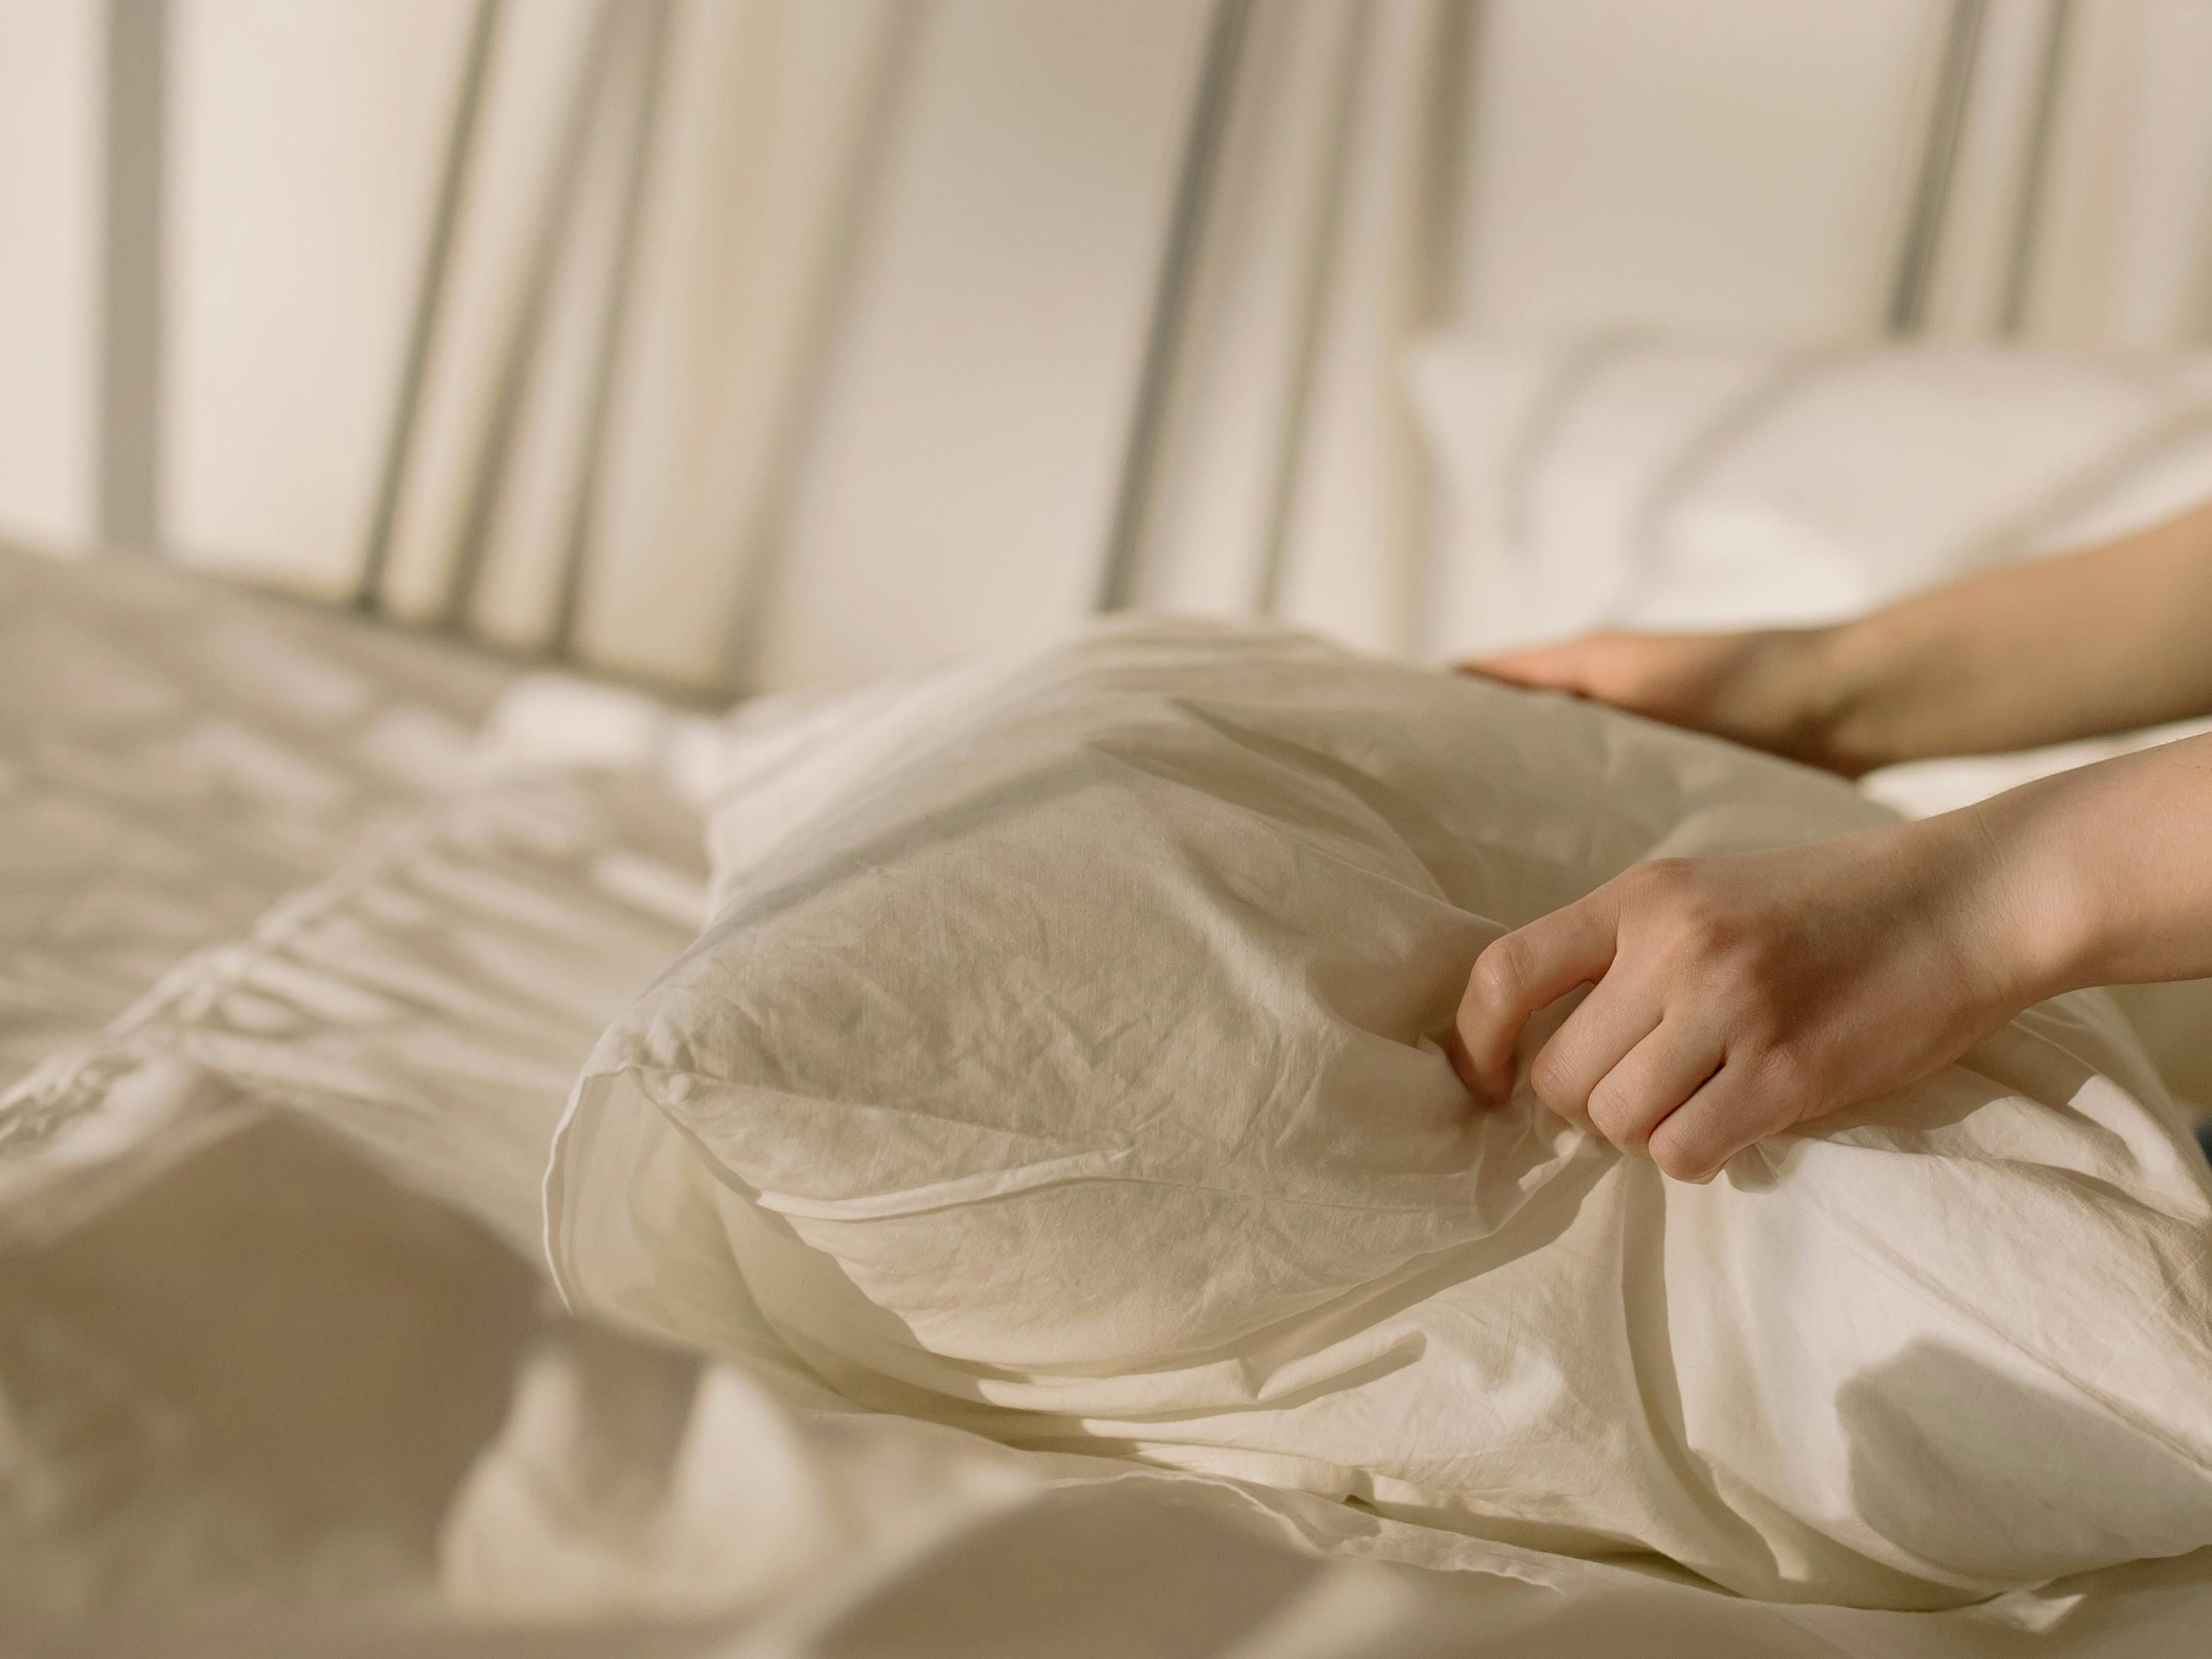 An image of two hands gently placing a pillow in white linens on a sun drenched bed.